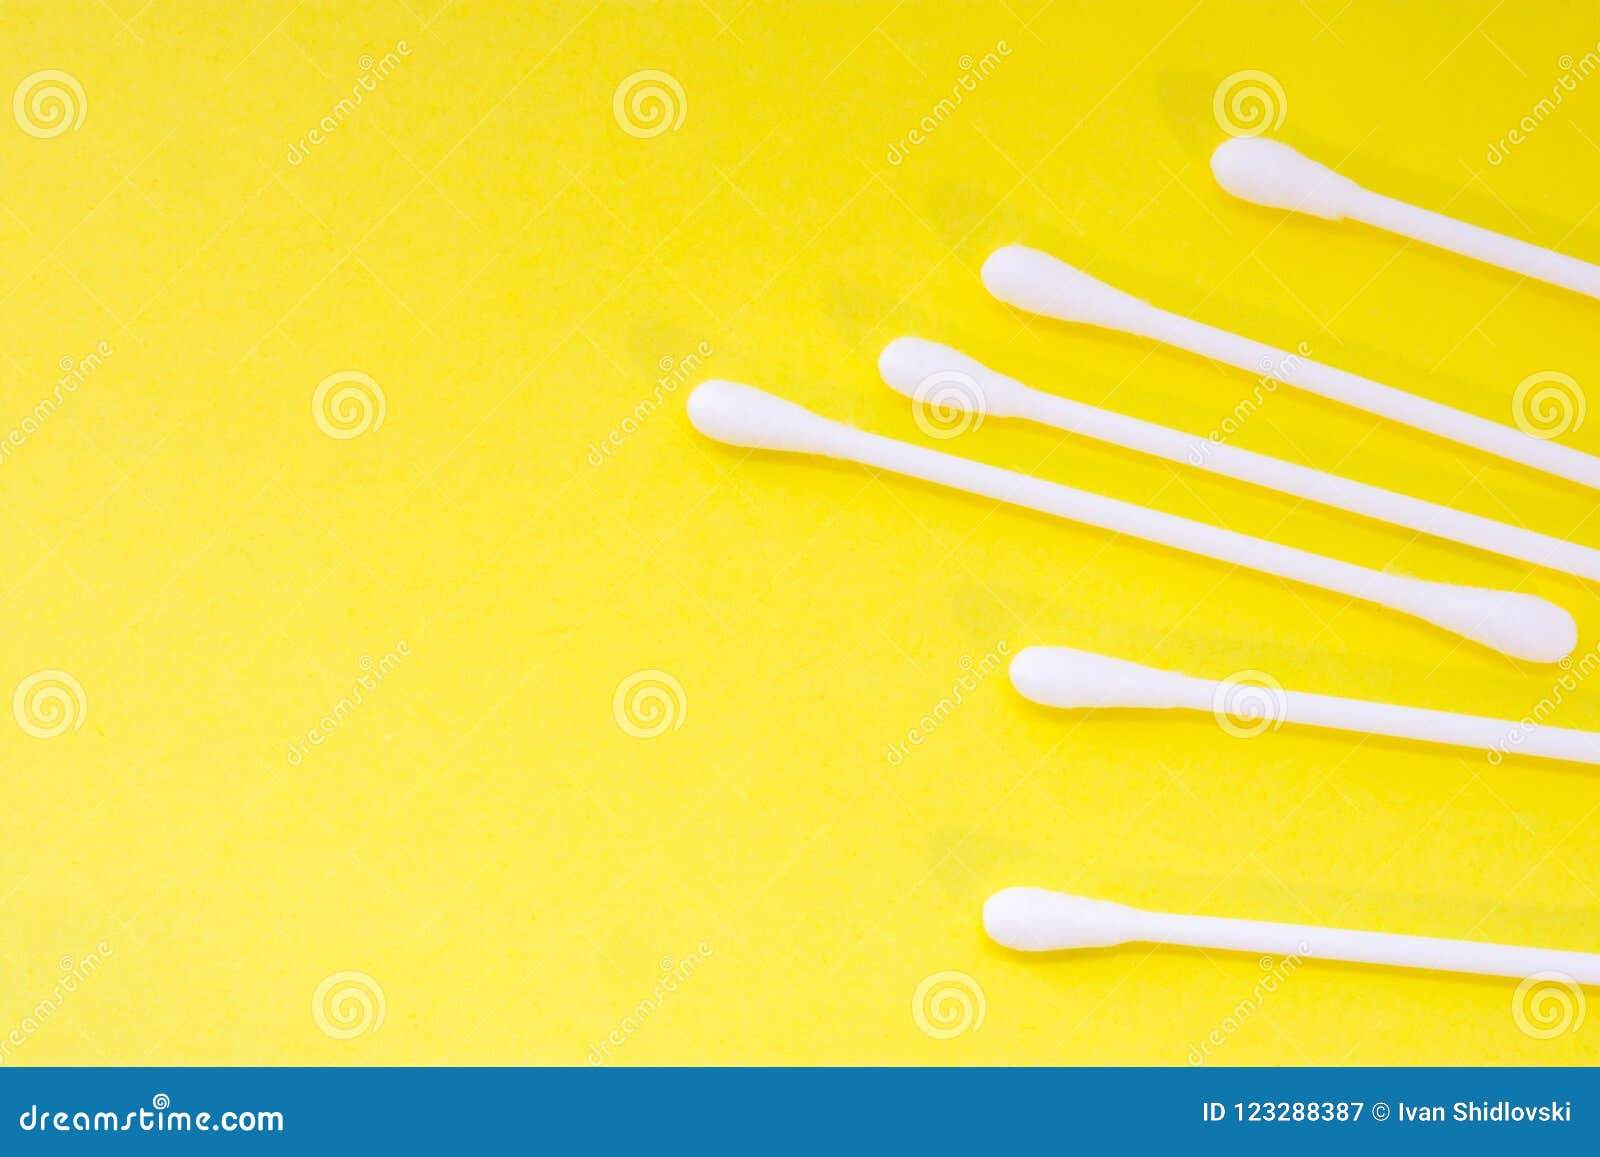 white cotton swabs or buds are on yellow uniform background view from above with clear area of half of photo for labels or headers